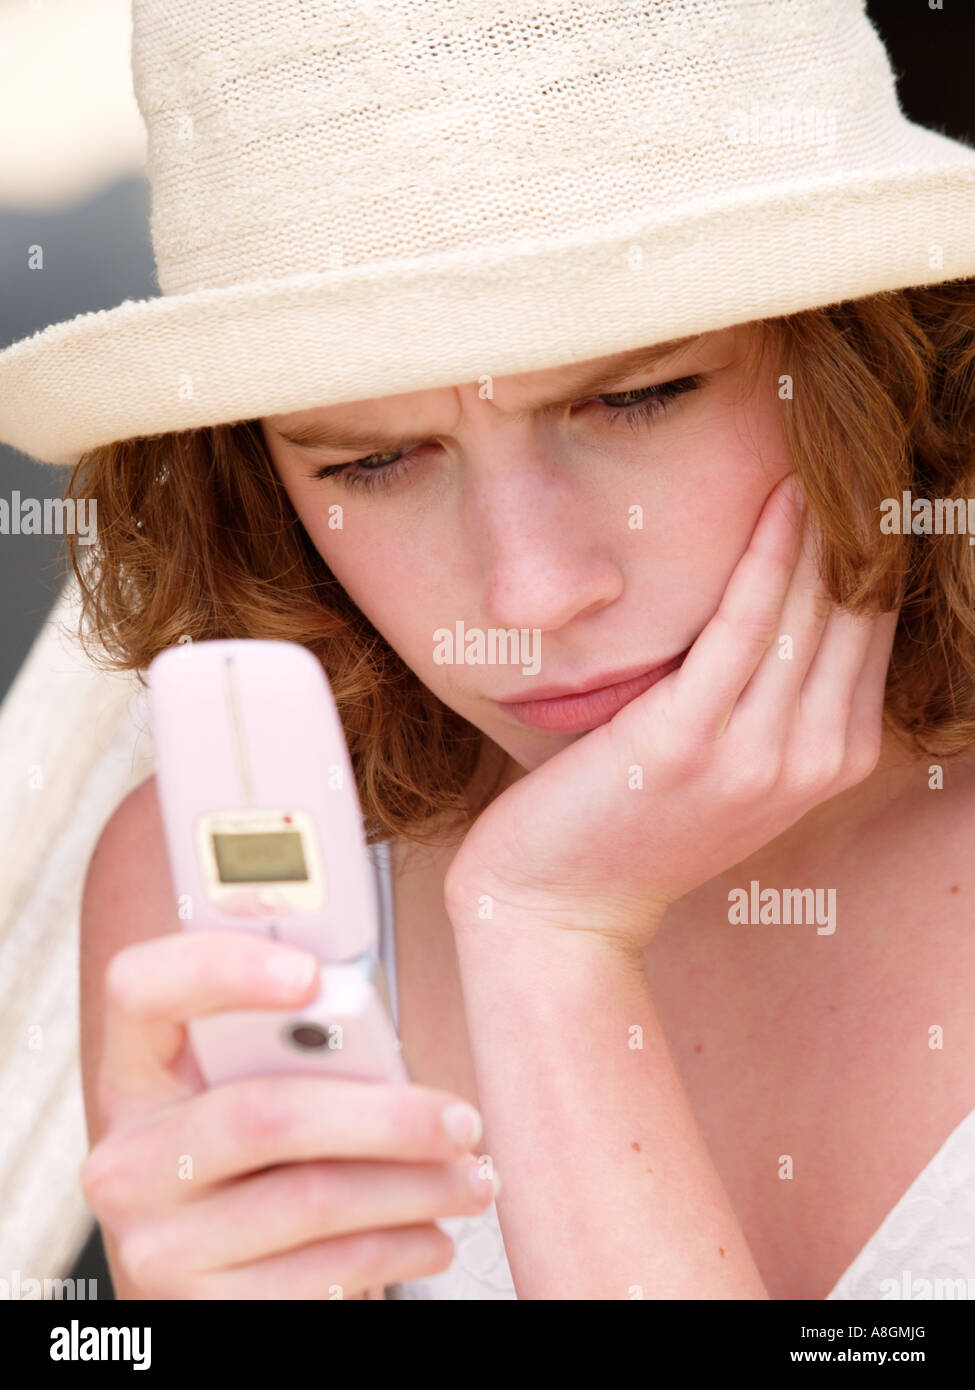 Sad disappointed angry teenage girl young woman reading sms text message on her mobile phone Stock Photo